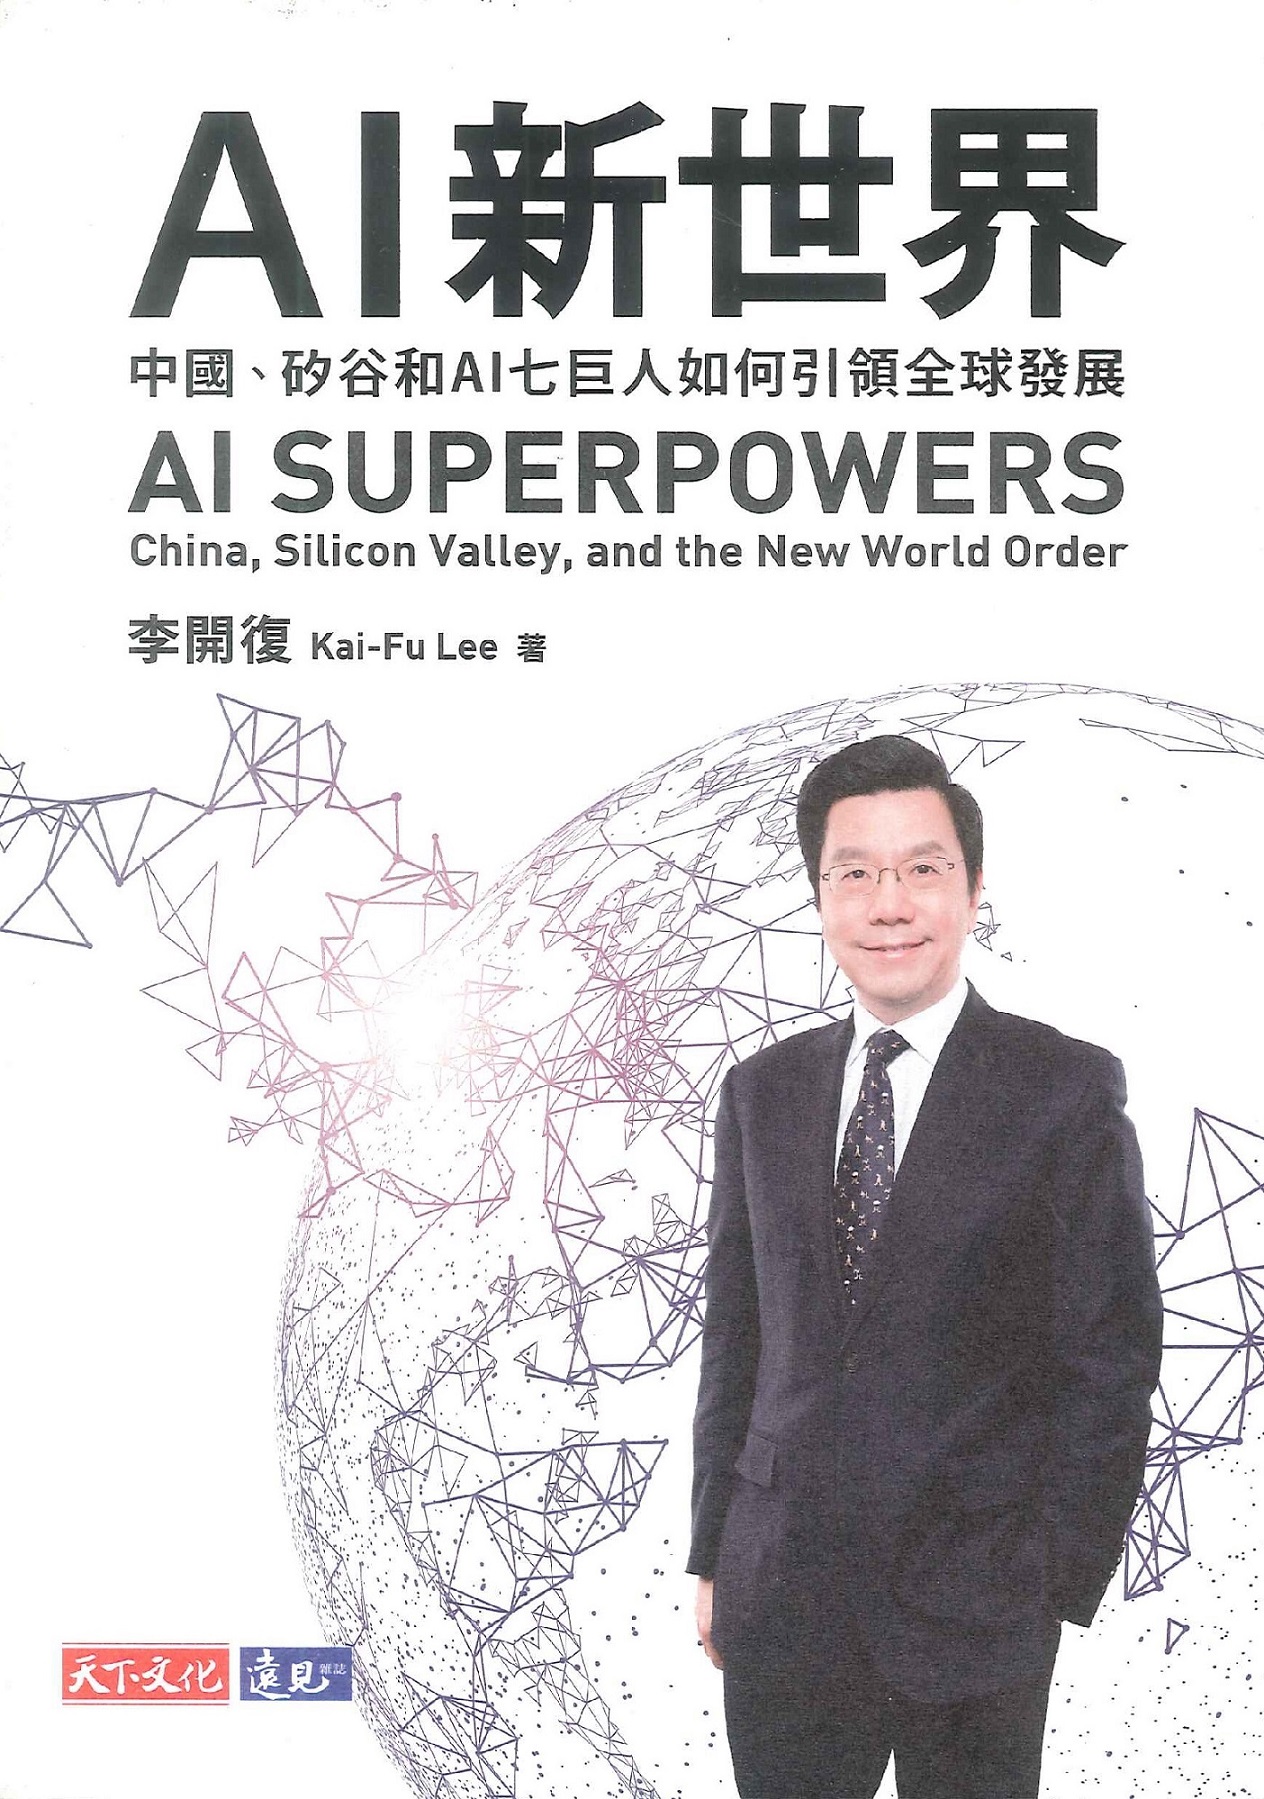 AI新世界:中國、矽谷和AI七巨人如何引領全球發展=AI superpowers: China, Silicon Valley, and the new world order